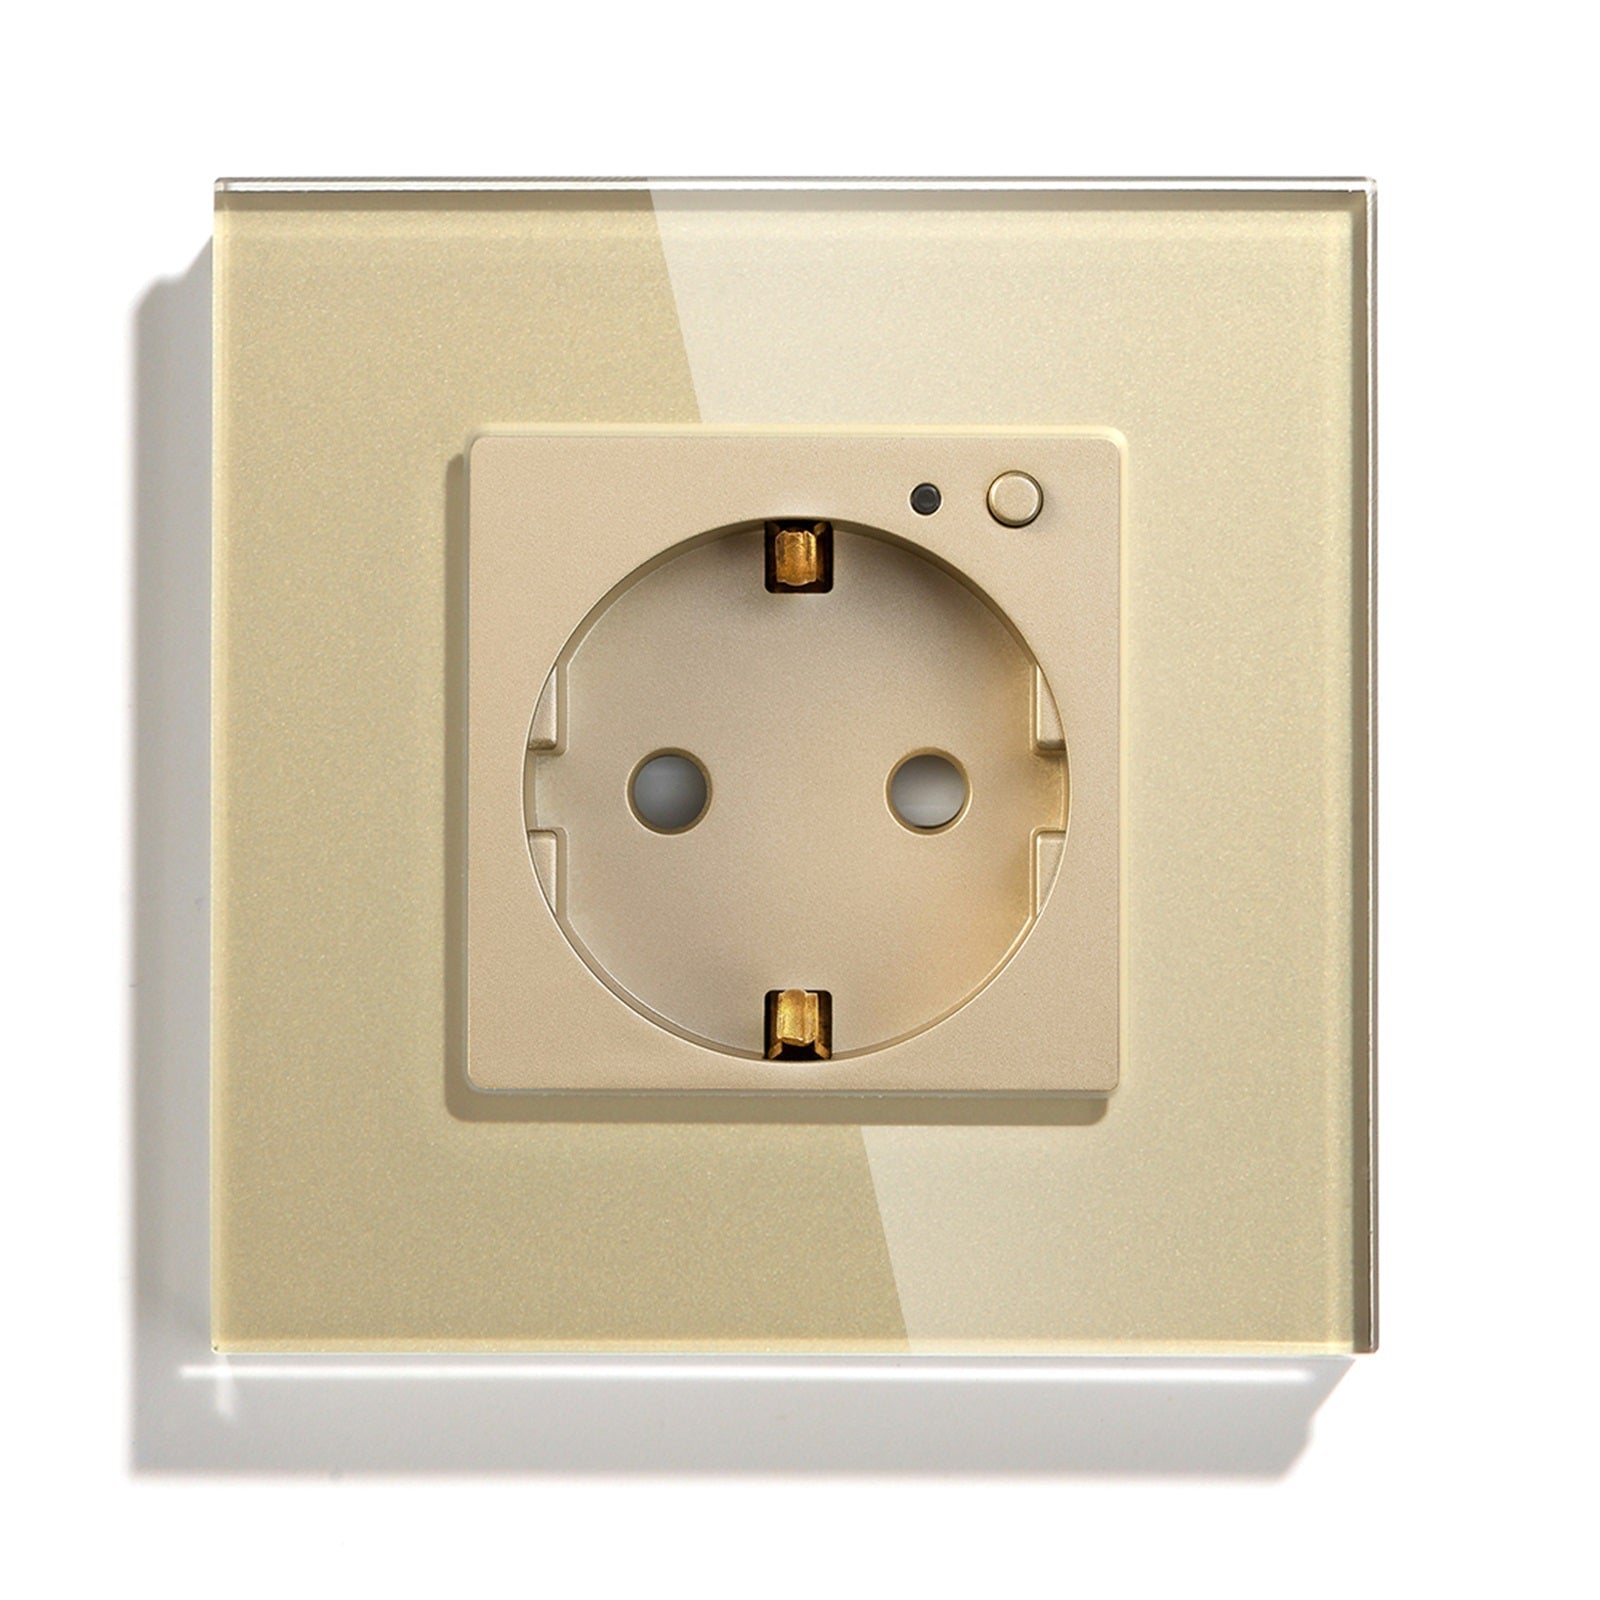 BSEED ZigBee EU Wall Sockets Power Outlets Kids Protection Wall Plates & Covers Bseedswitch golden Signle 